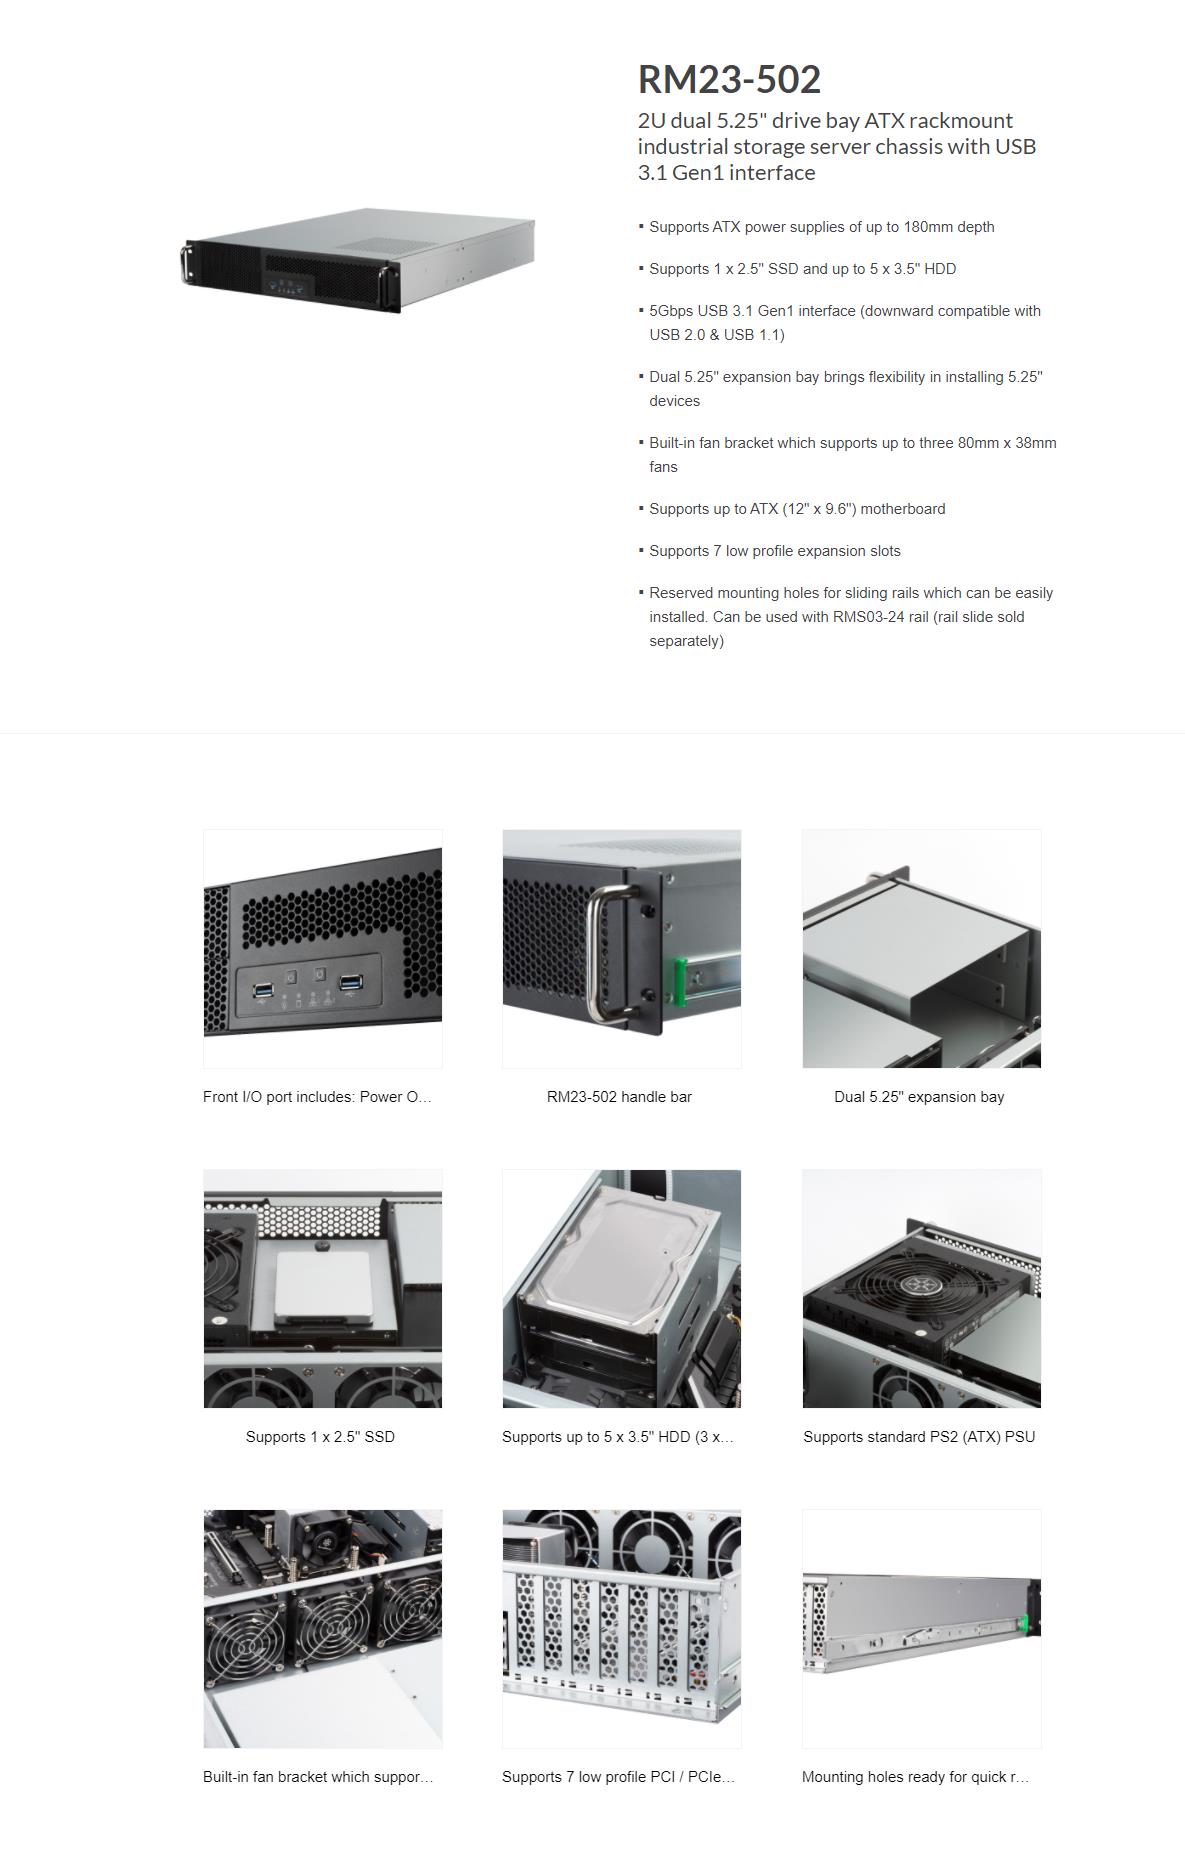 A large marketing image providing additional information about the product SilverStone RM23-502 2U Rackmount Case - Black - Additional alt info not provided